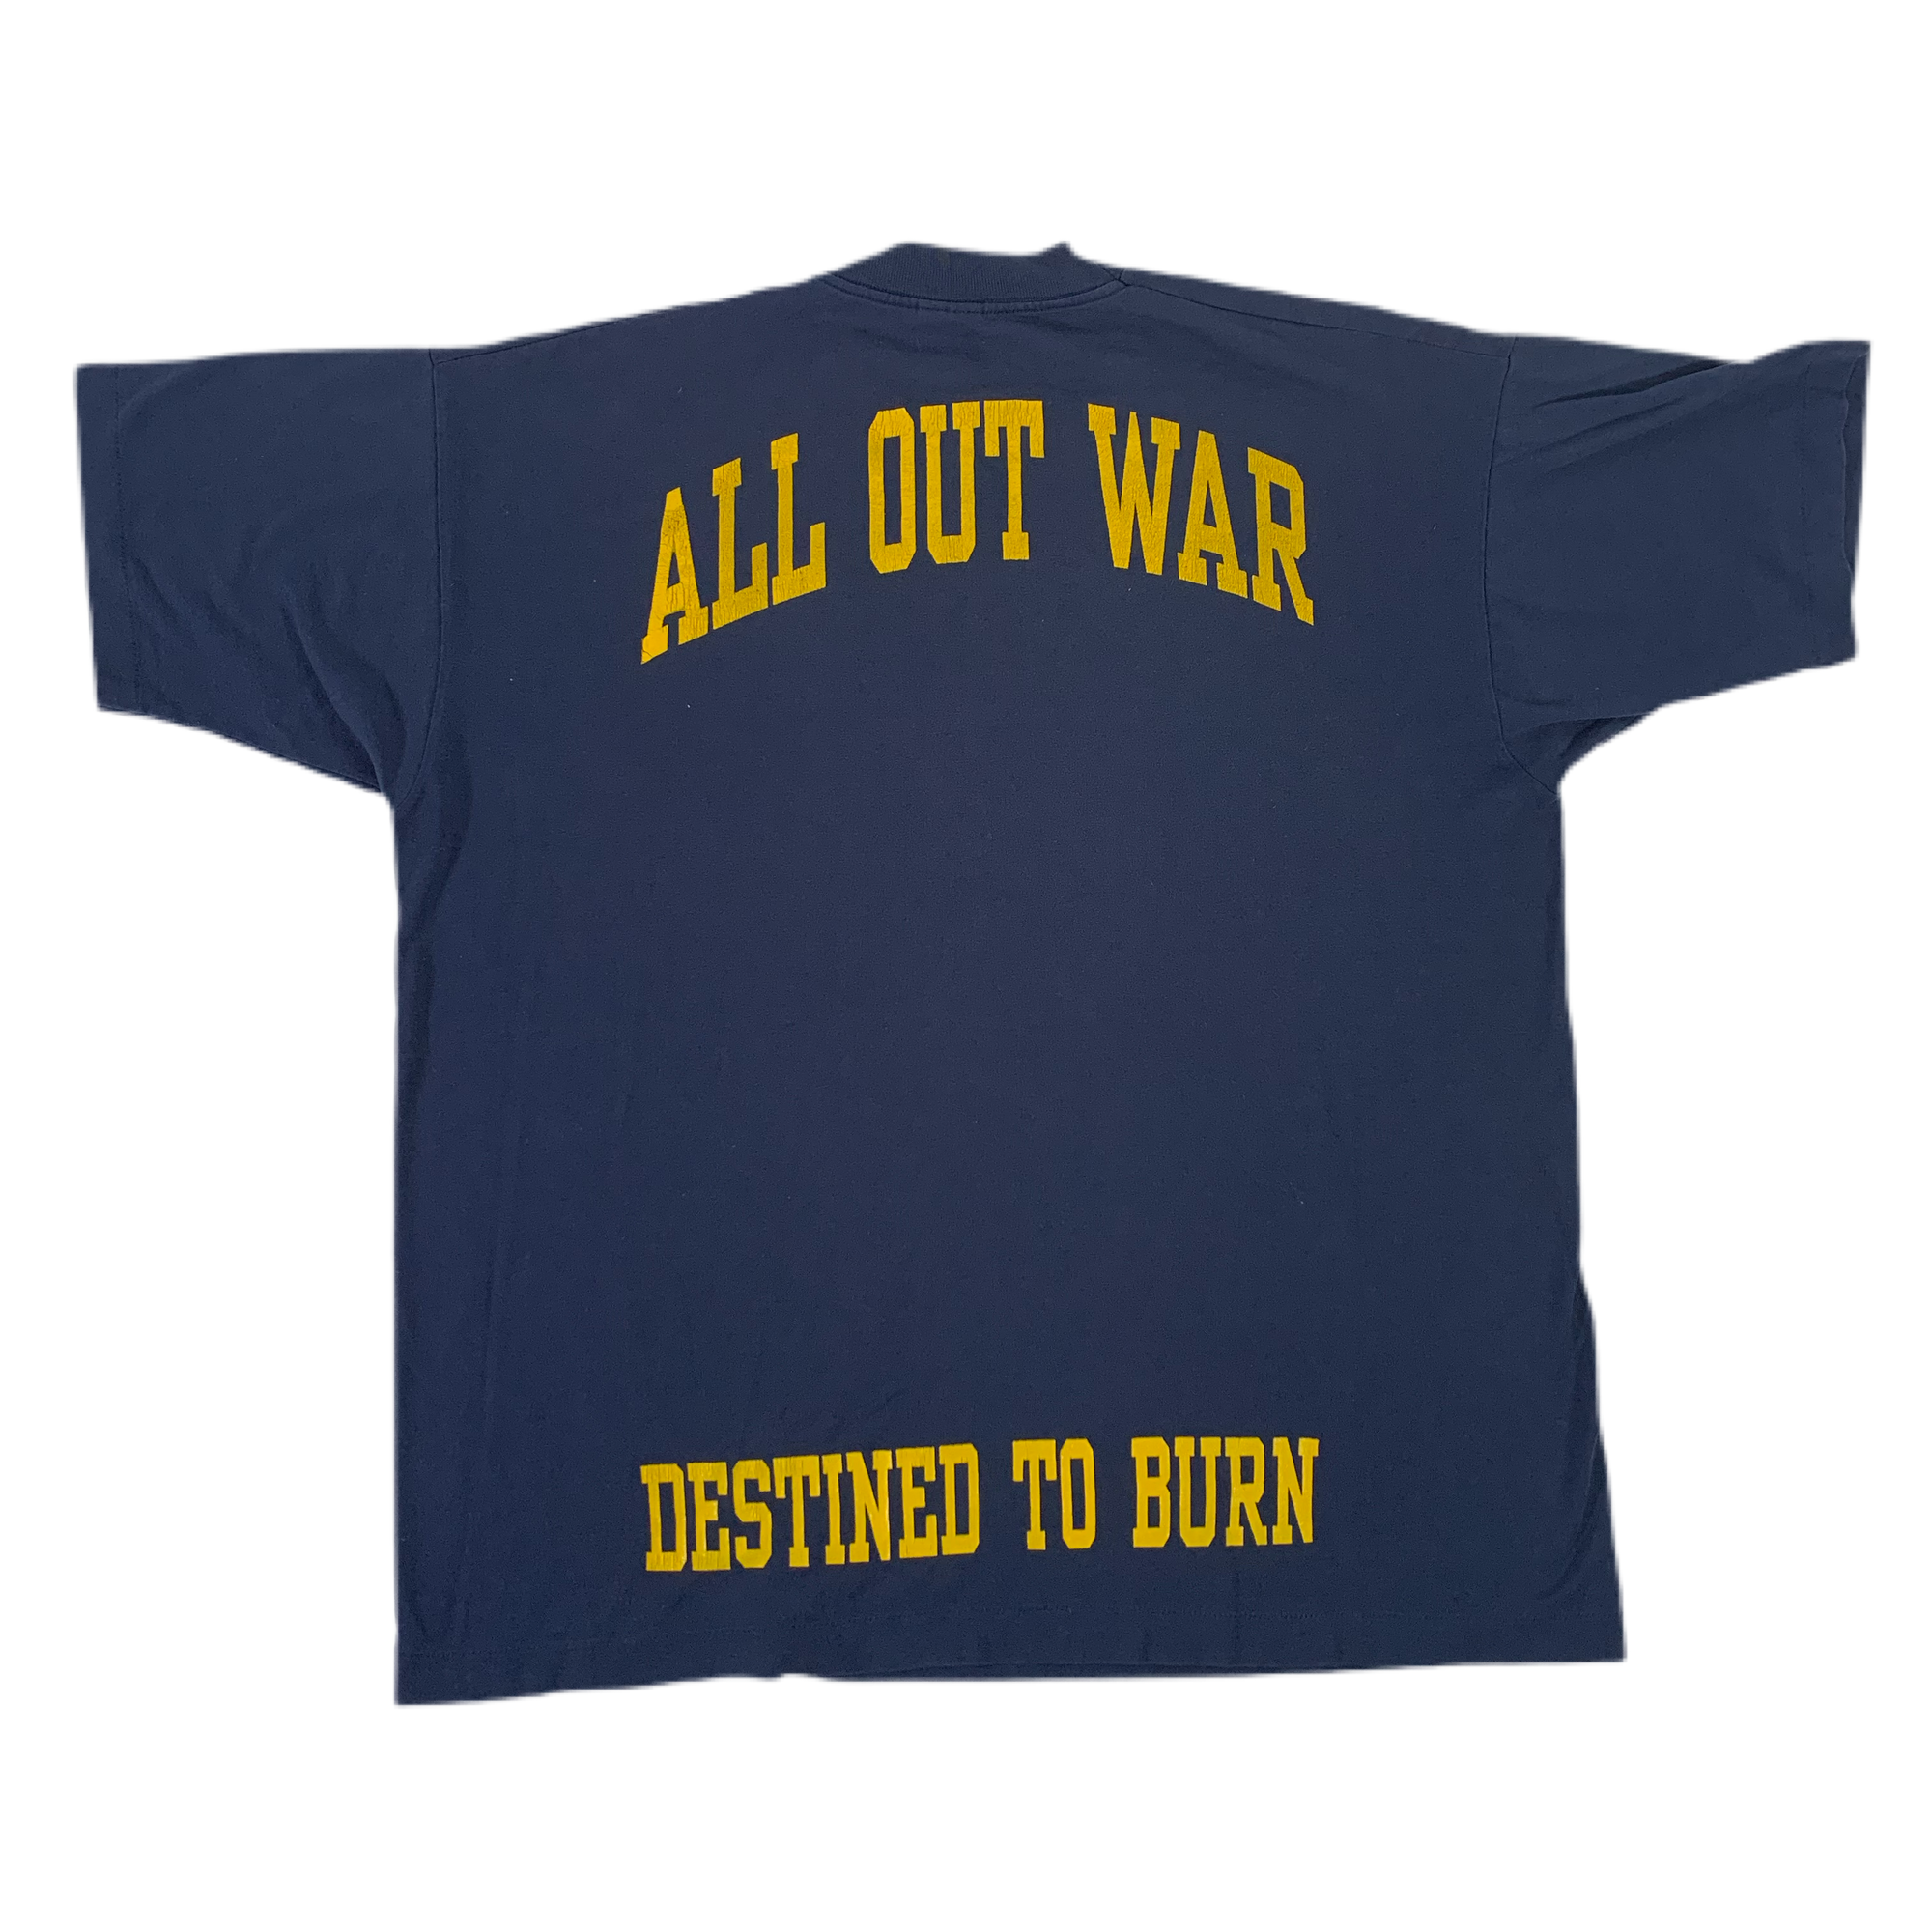 Vintage All Out War "Destined To Burn" T-Shirt - jointcustodydc